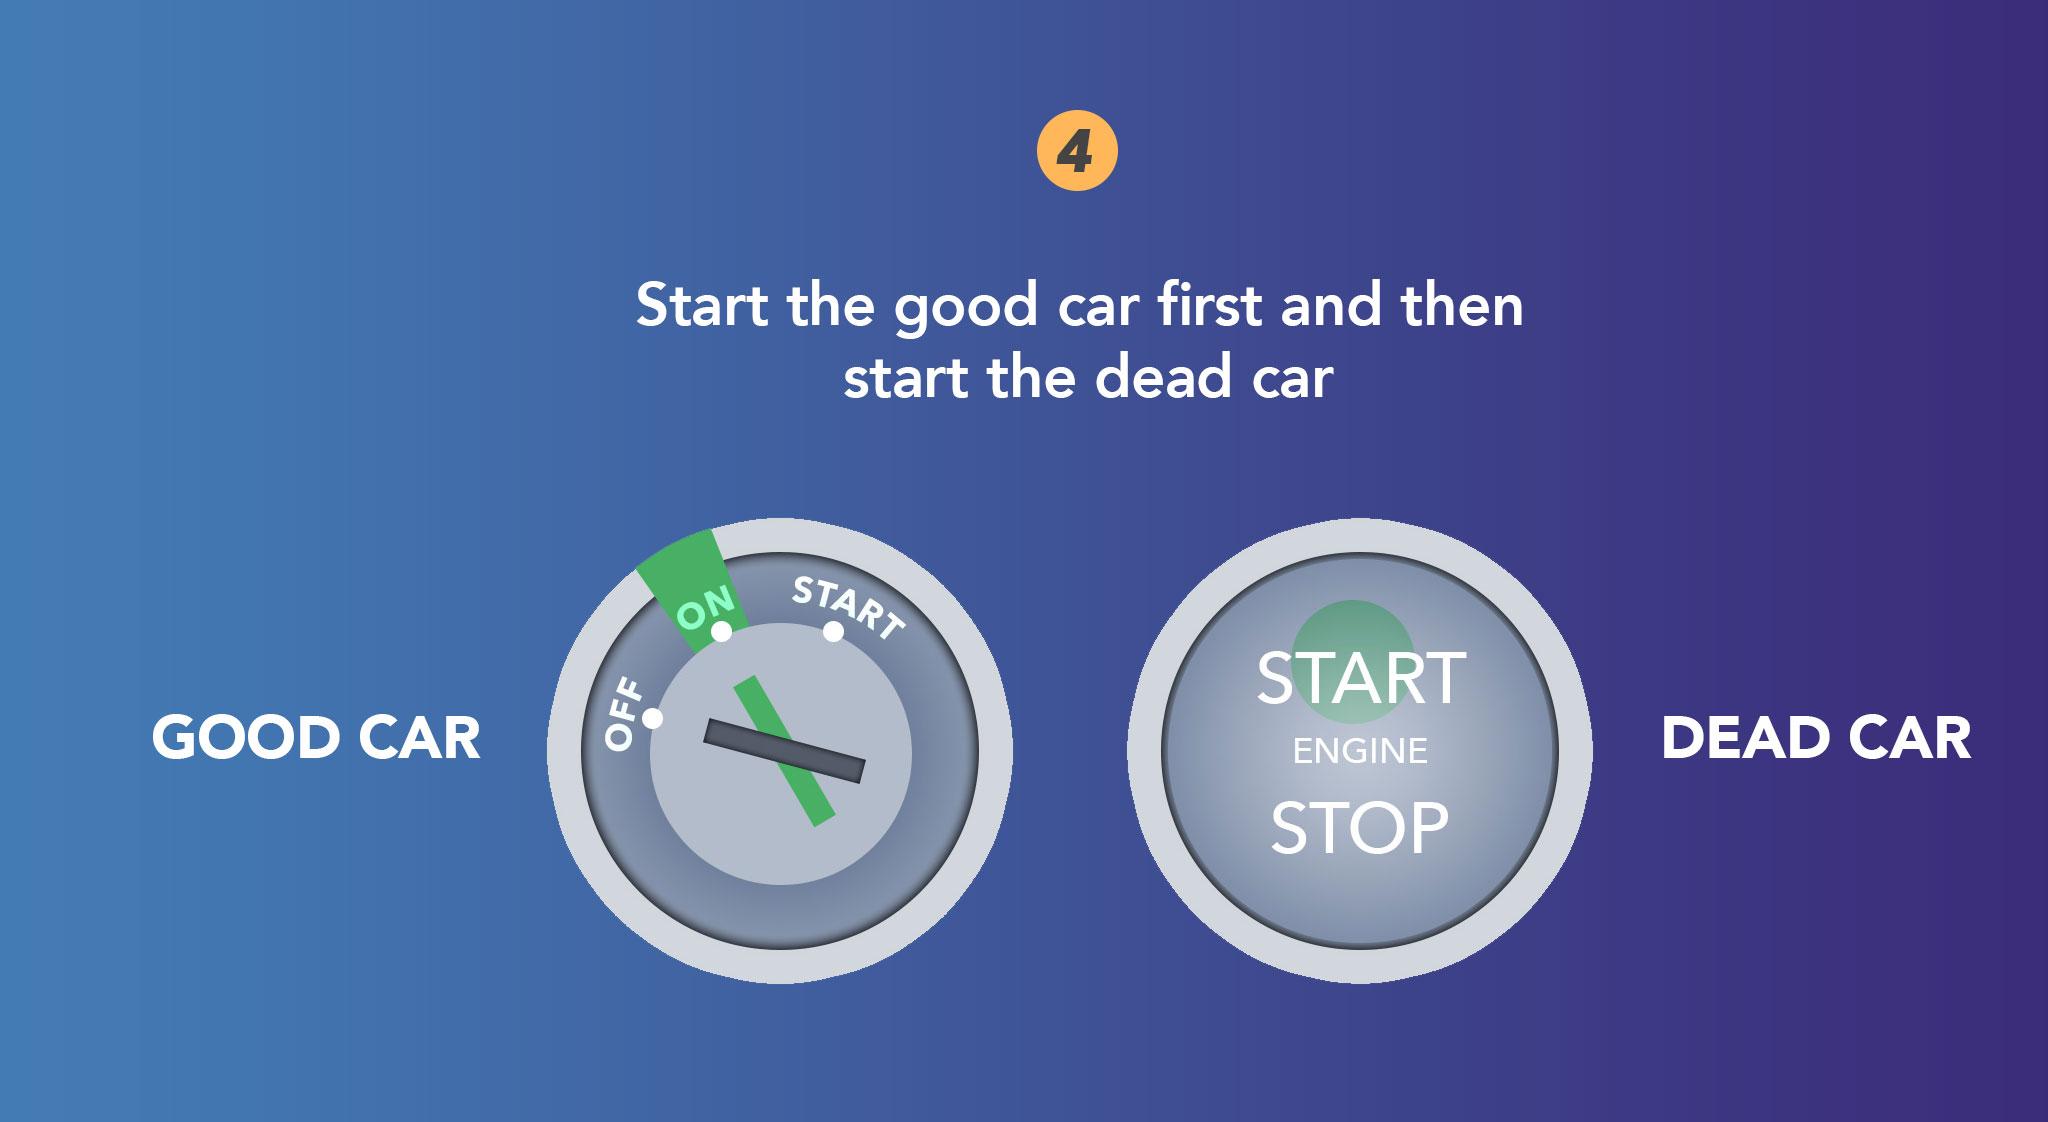 Start the good car first and then start the dead car